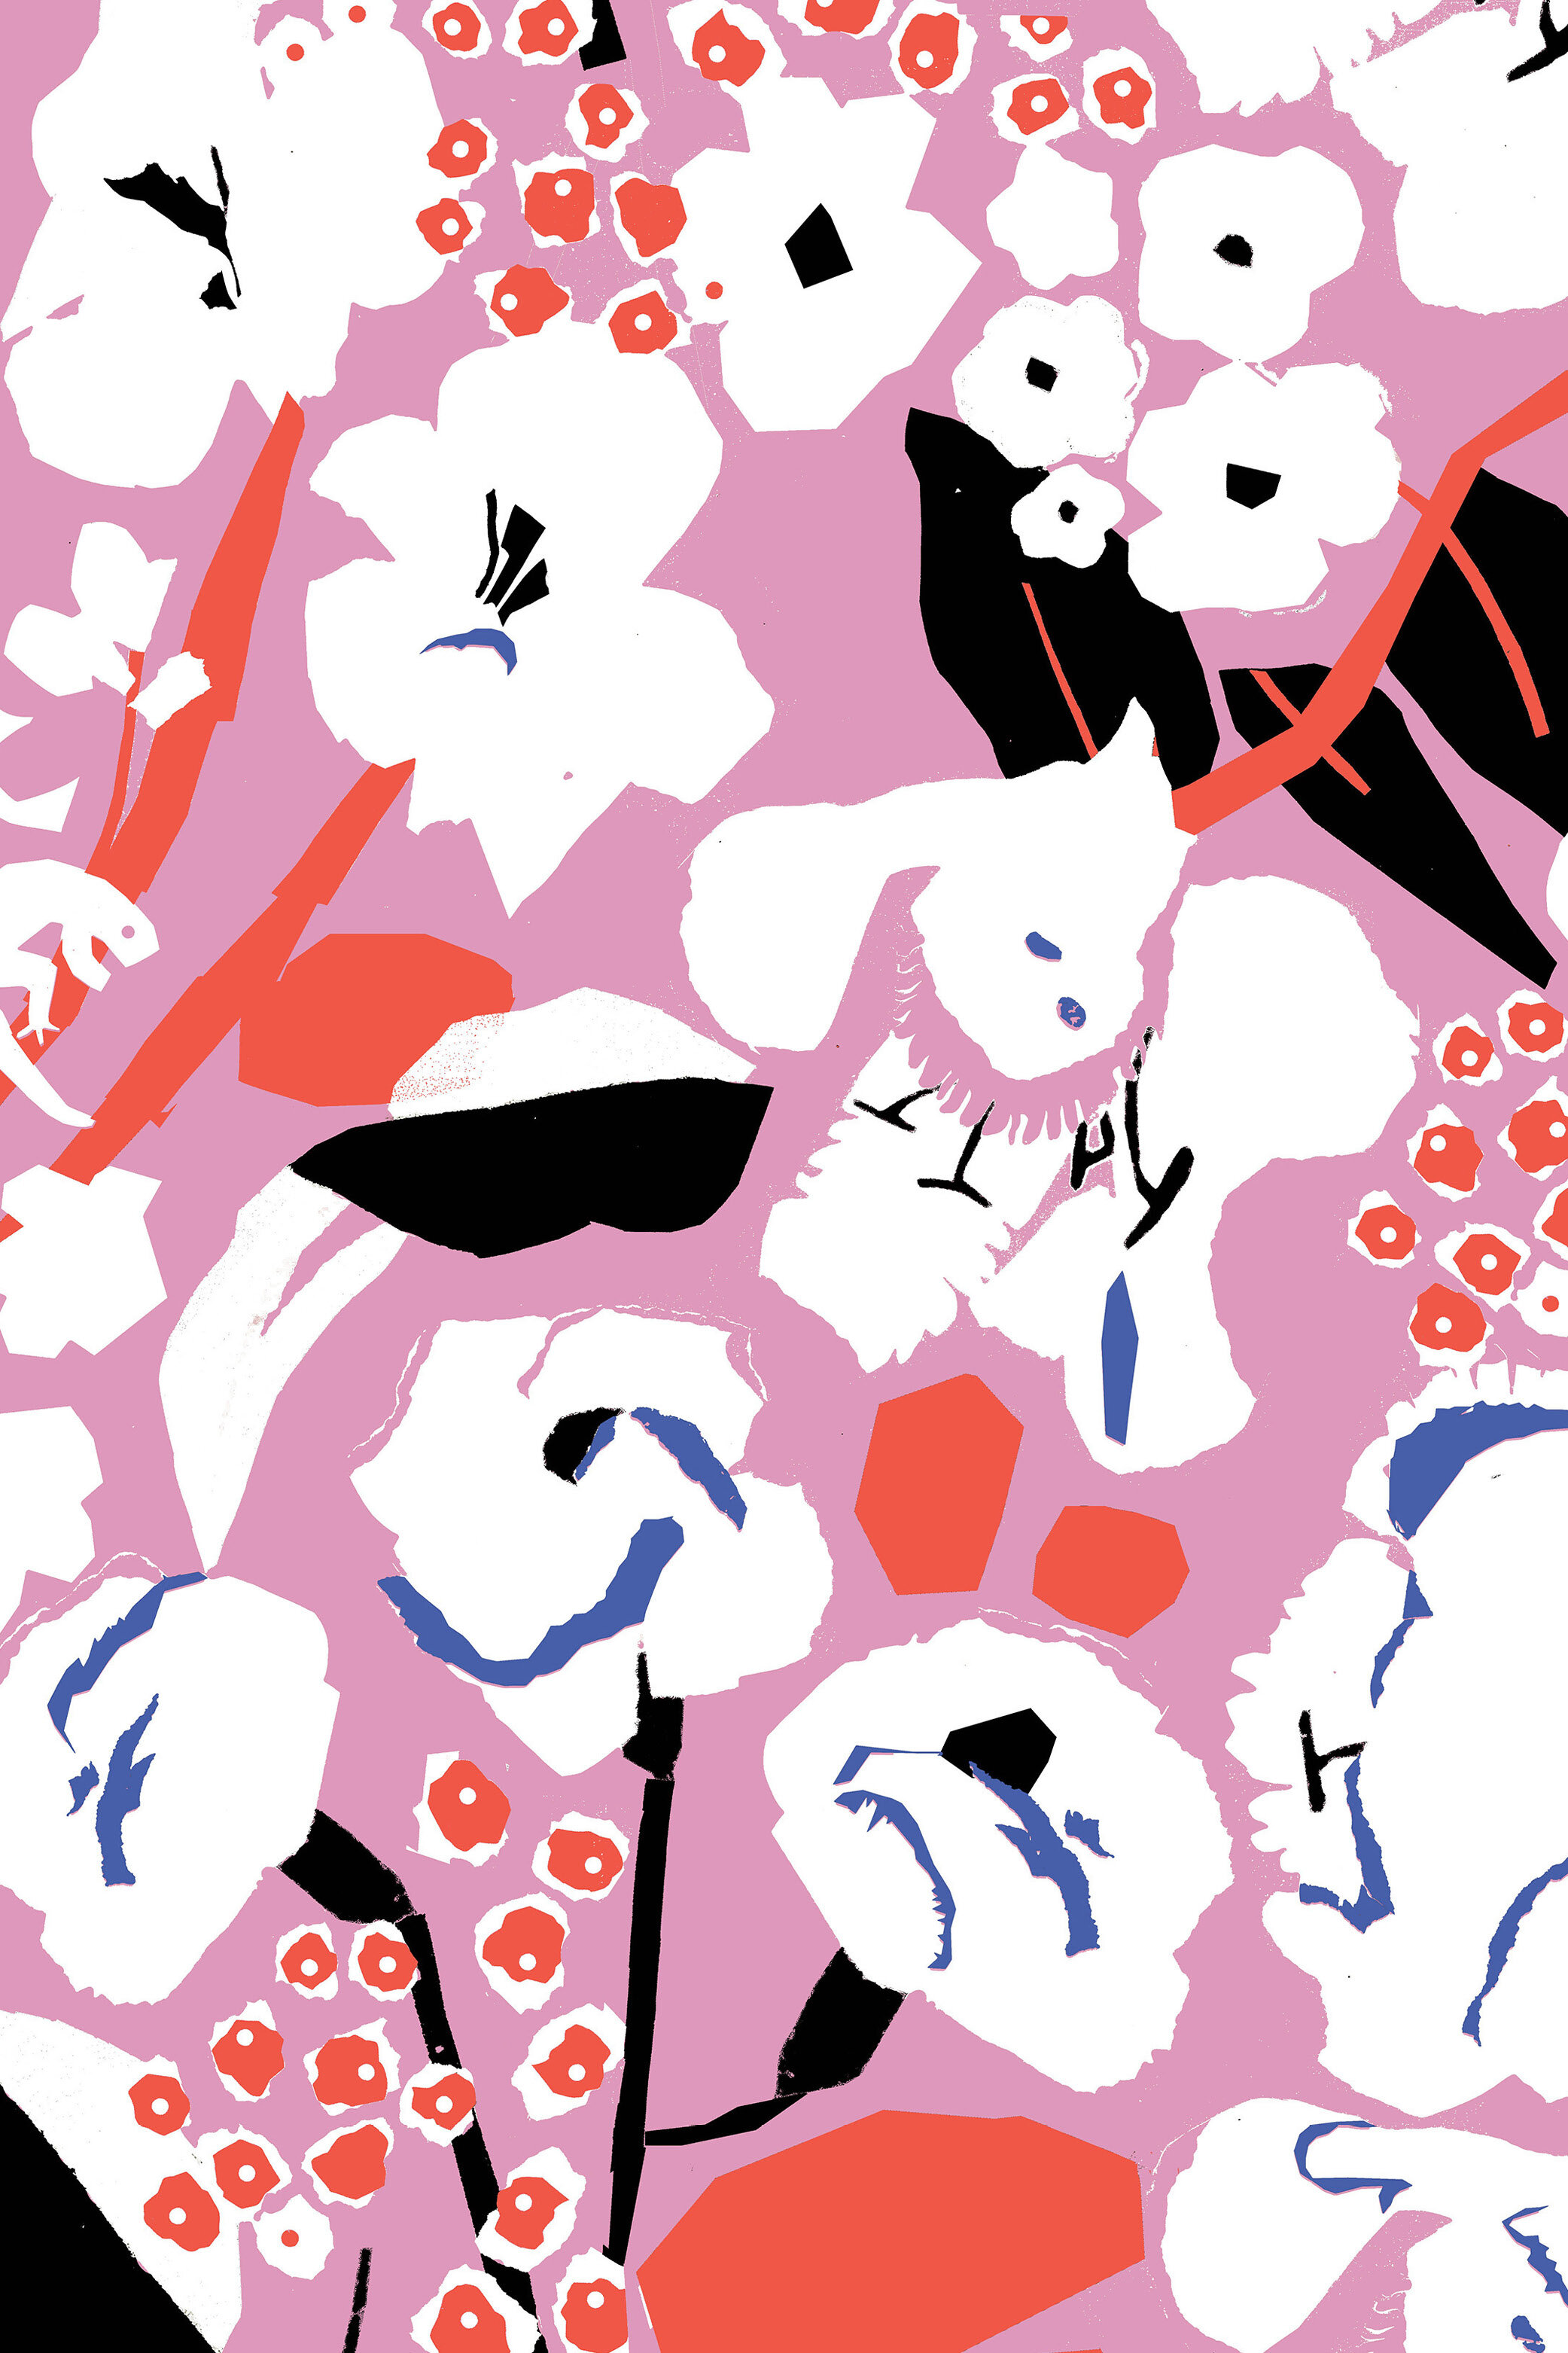 Print Design and Surface Pattern — Katy Welsh